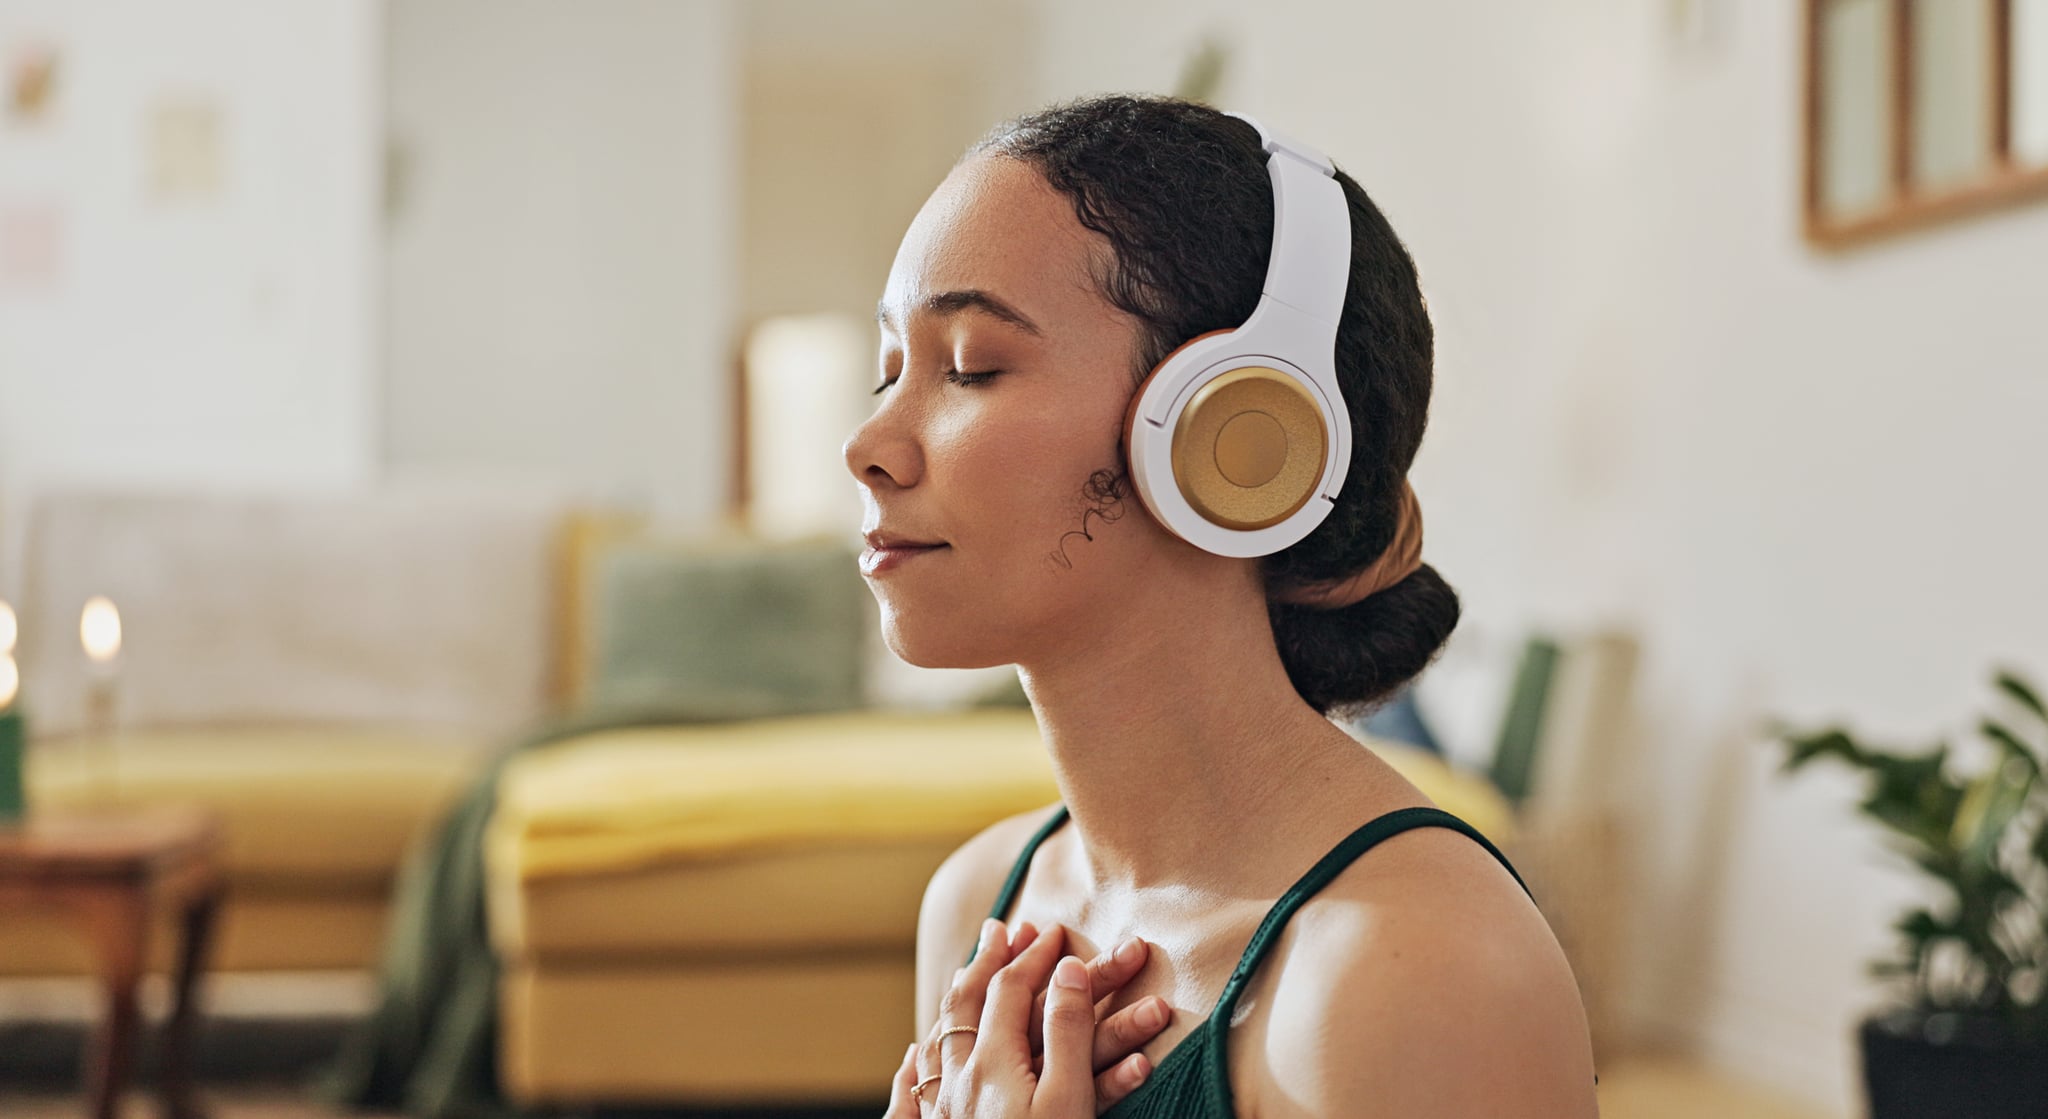 Woman, meditation and yoga in headphones listening to calm music, holistic exercise and peace in living room. Young person with audio podcast, dream of health and relax in spiritual wellness at home